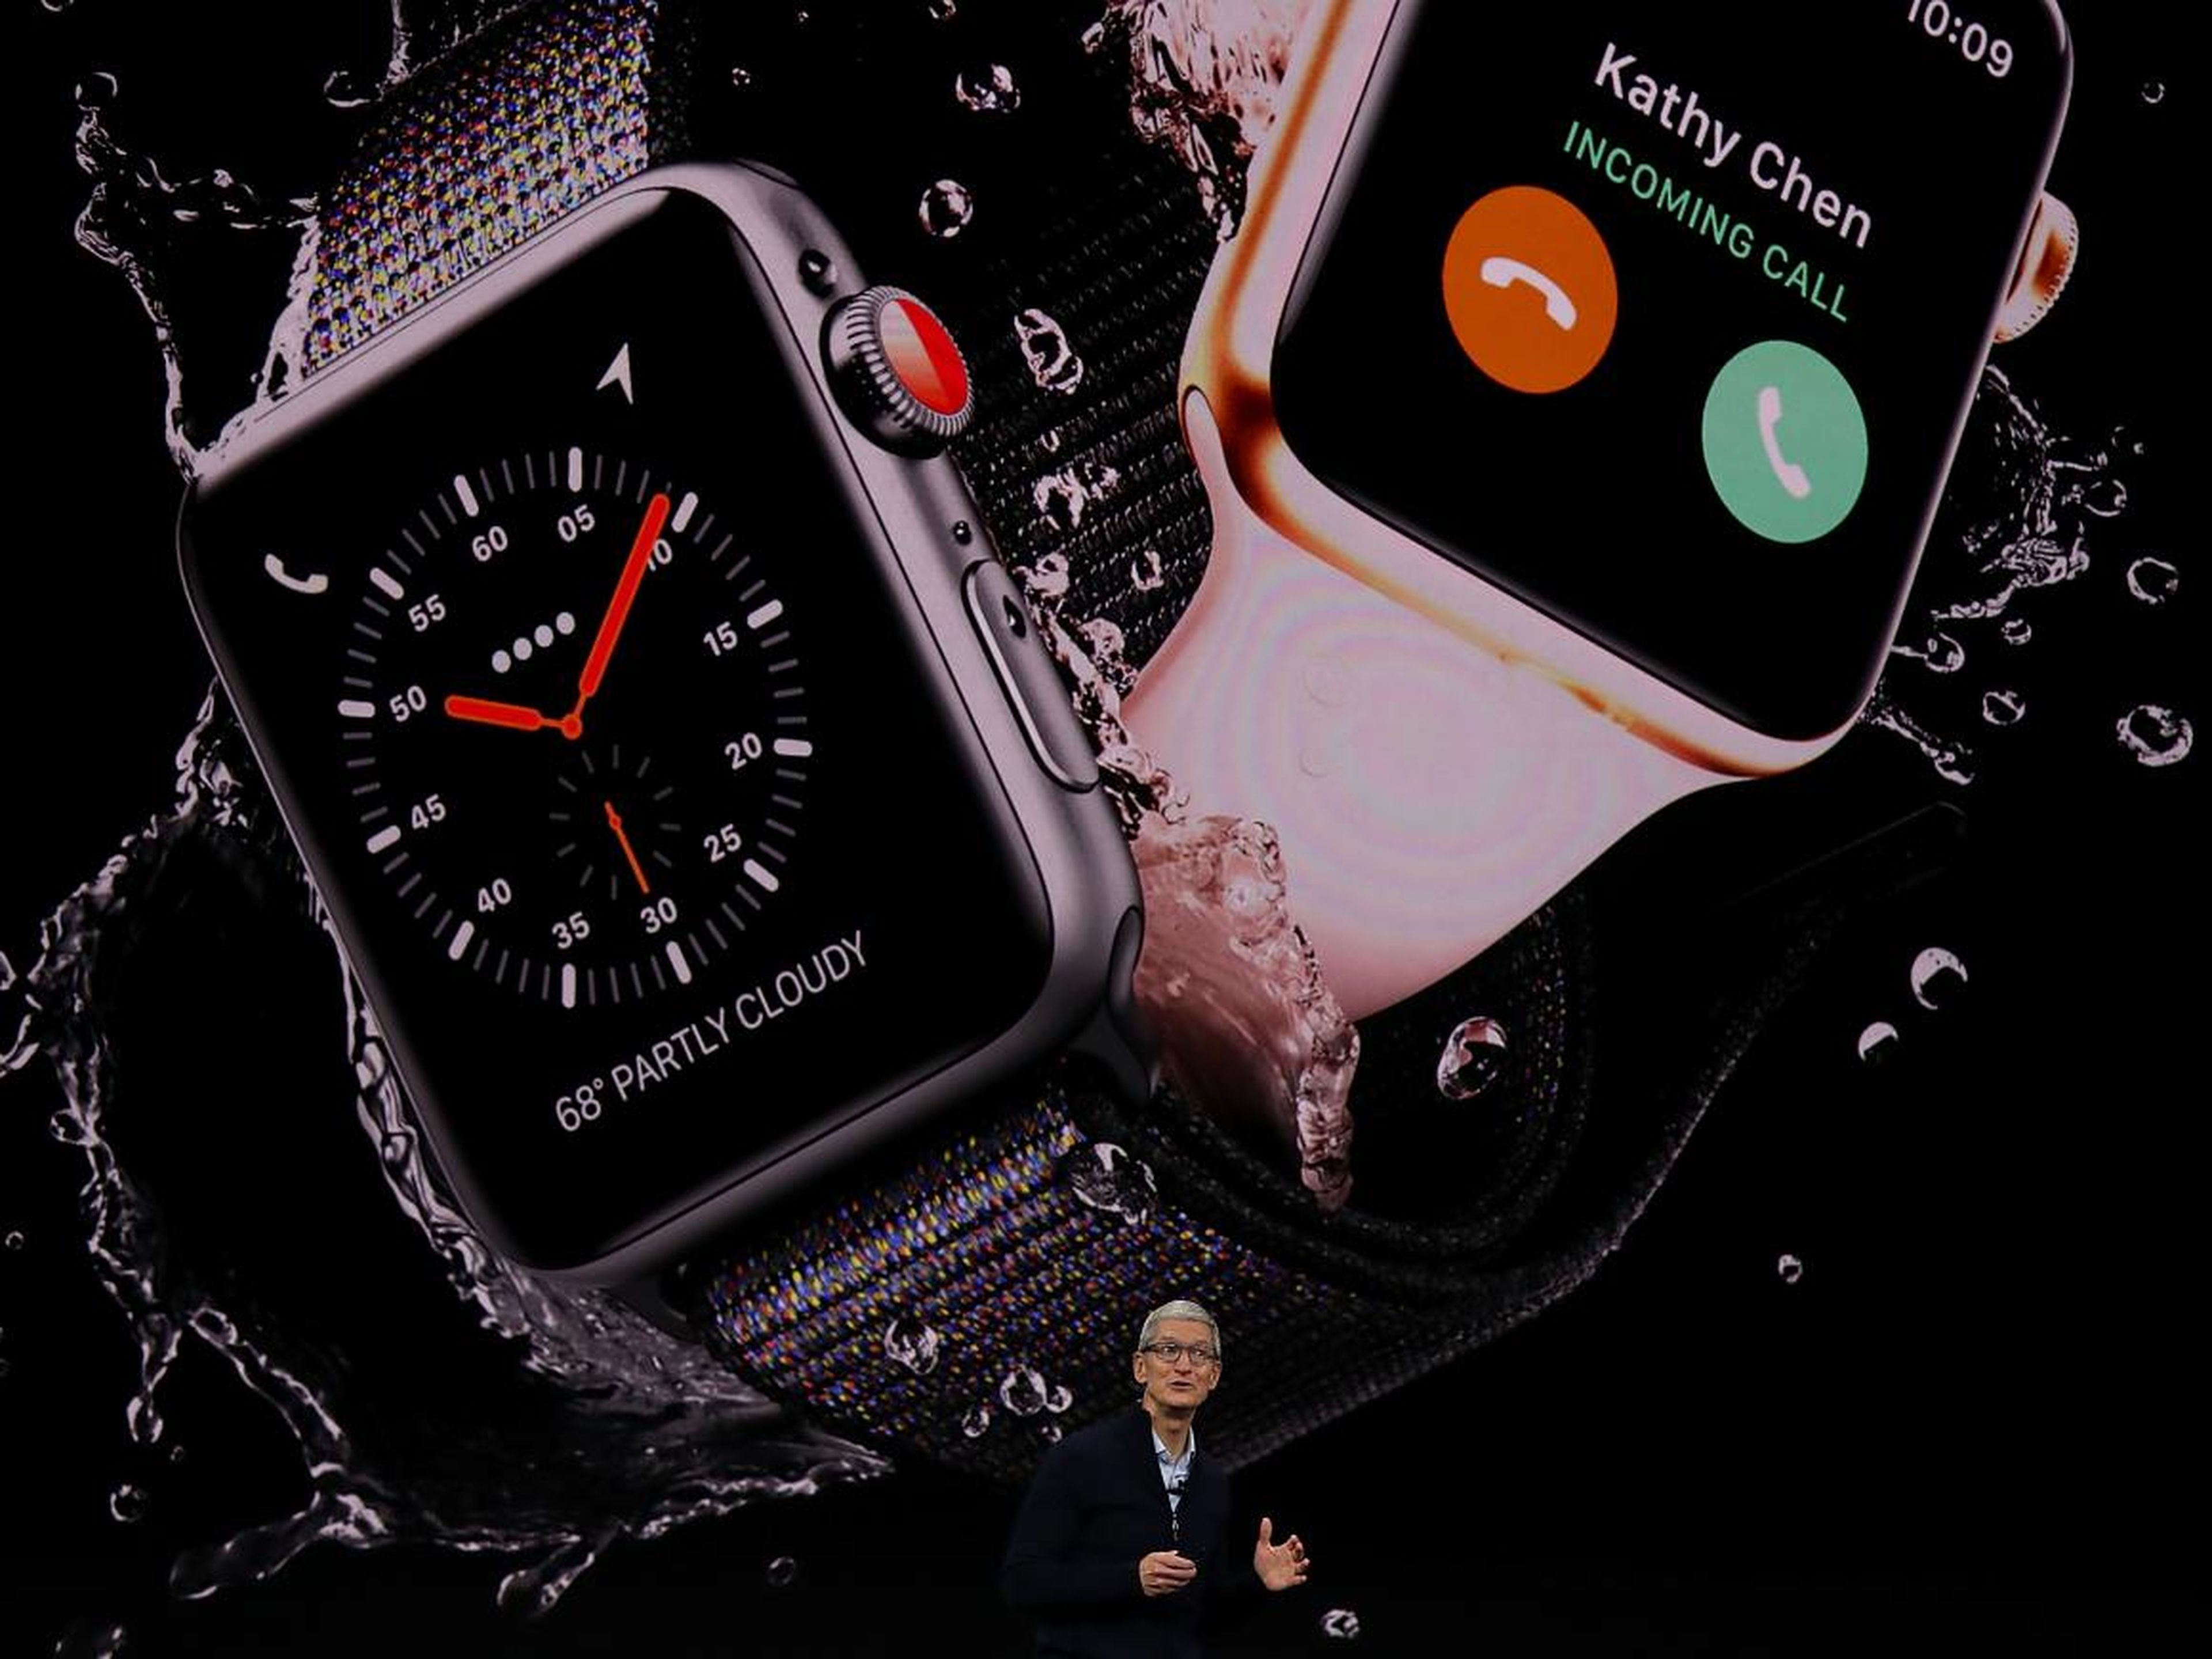 Both the Apple Watch and Galaxy Watch are fitness- and wellness-focused smartwatches.